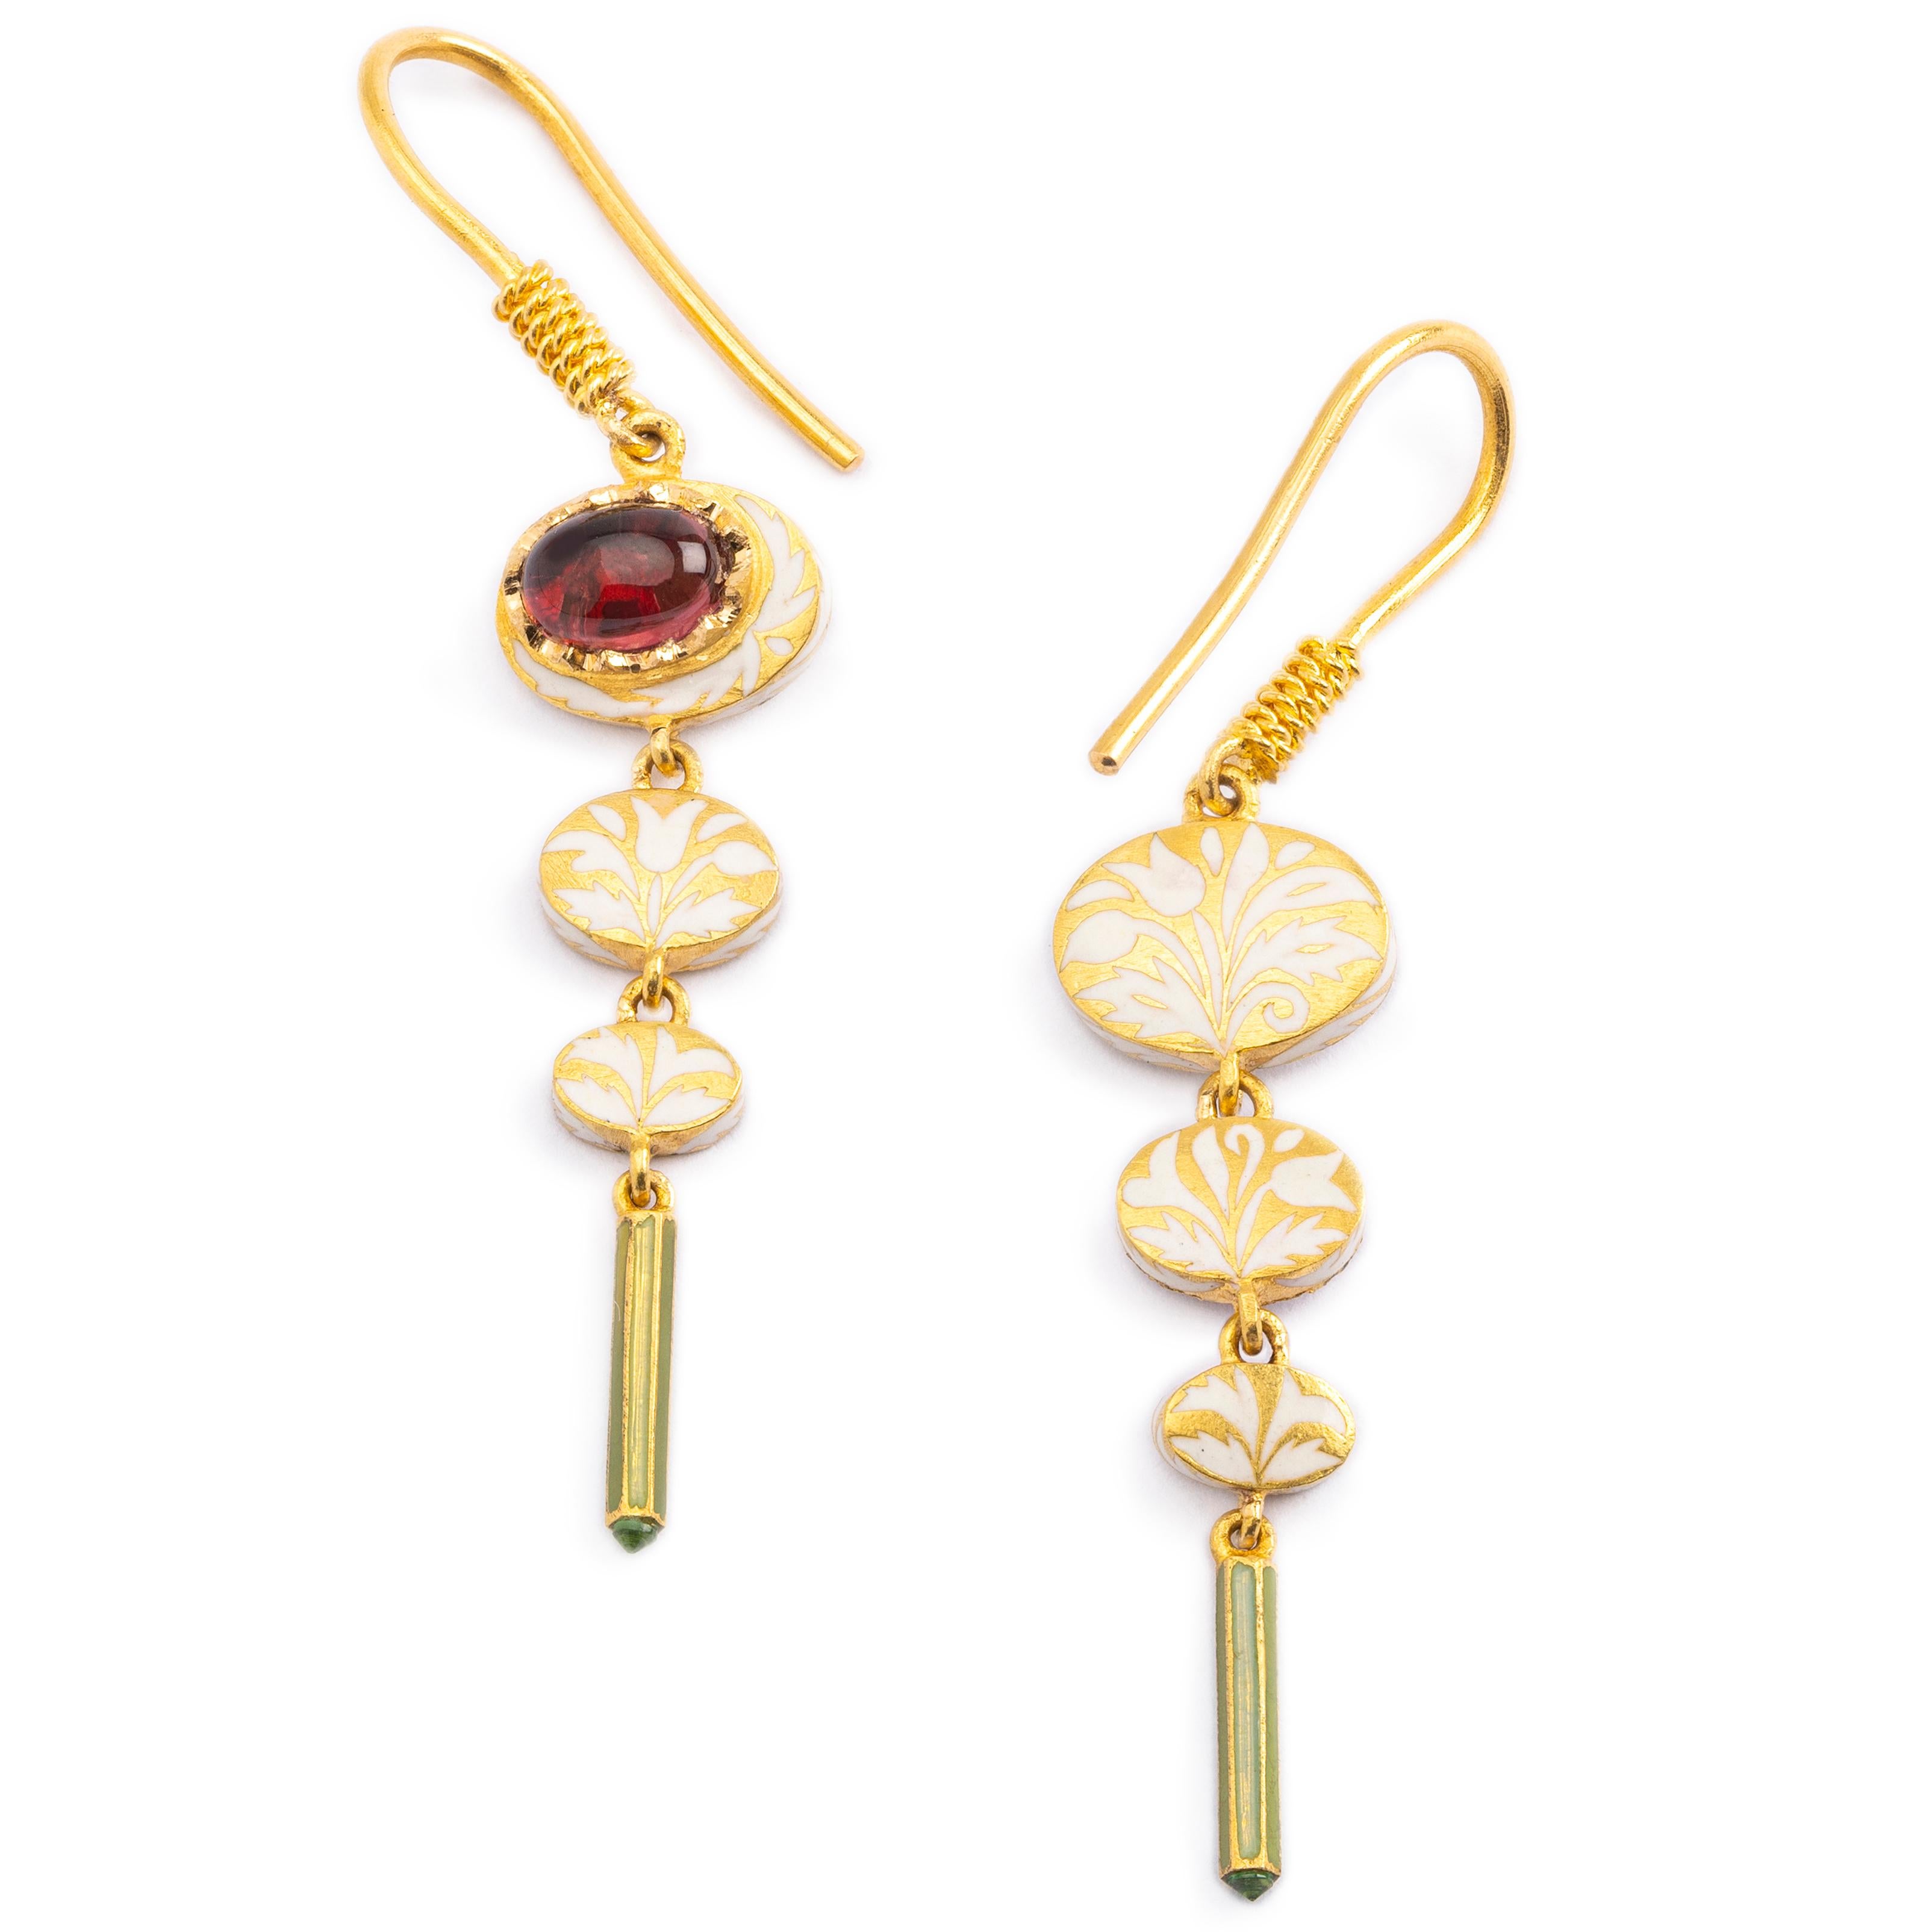 These beautiful dangle earrings are from Agaro Jewels' Nizam collection. All Agaro jewelry is entirely hand engraved and enameled with hot fired glass enamel using an ancient 17th century jewelry making art from the ateliers of the Mughal Court. The